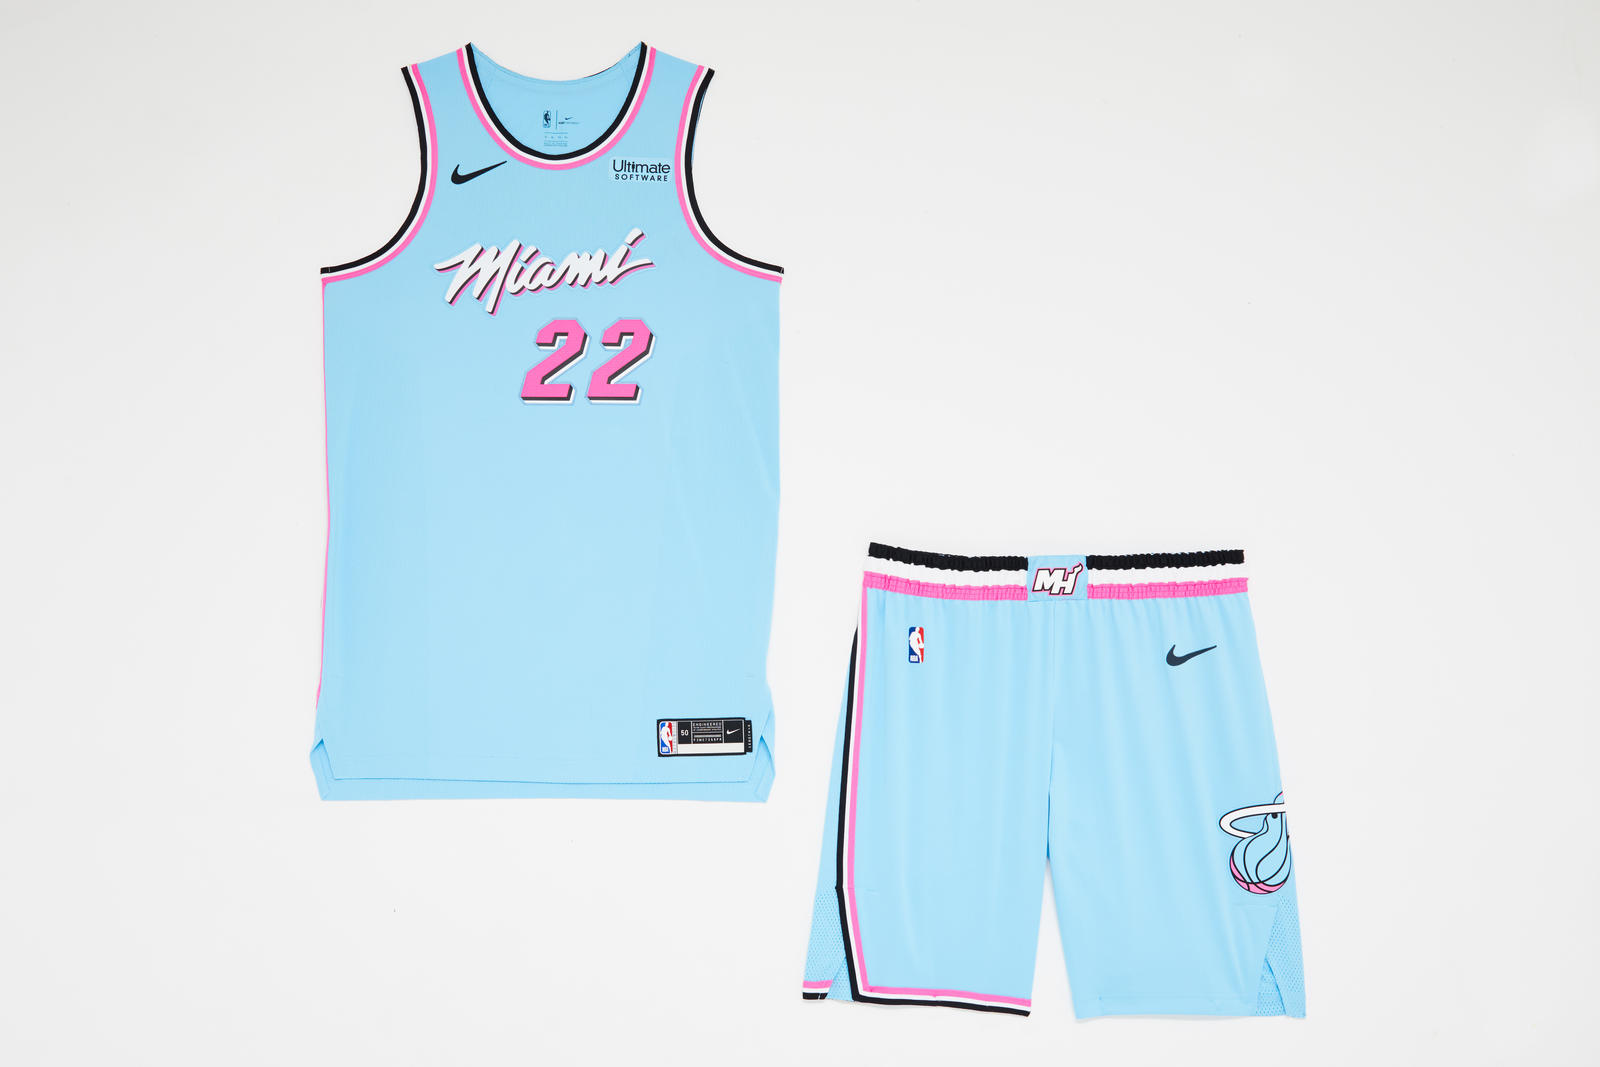 Nike's 2018/19 NBA “City Edition” Uniforms Are Here, Paying